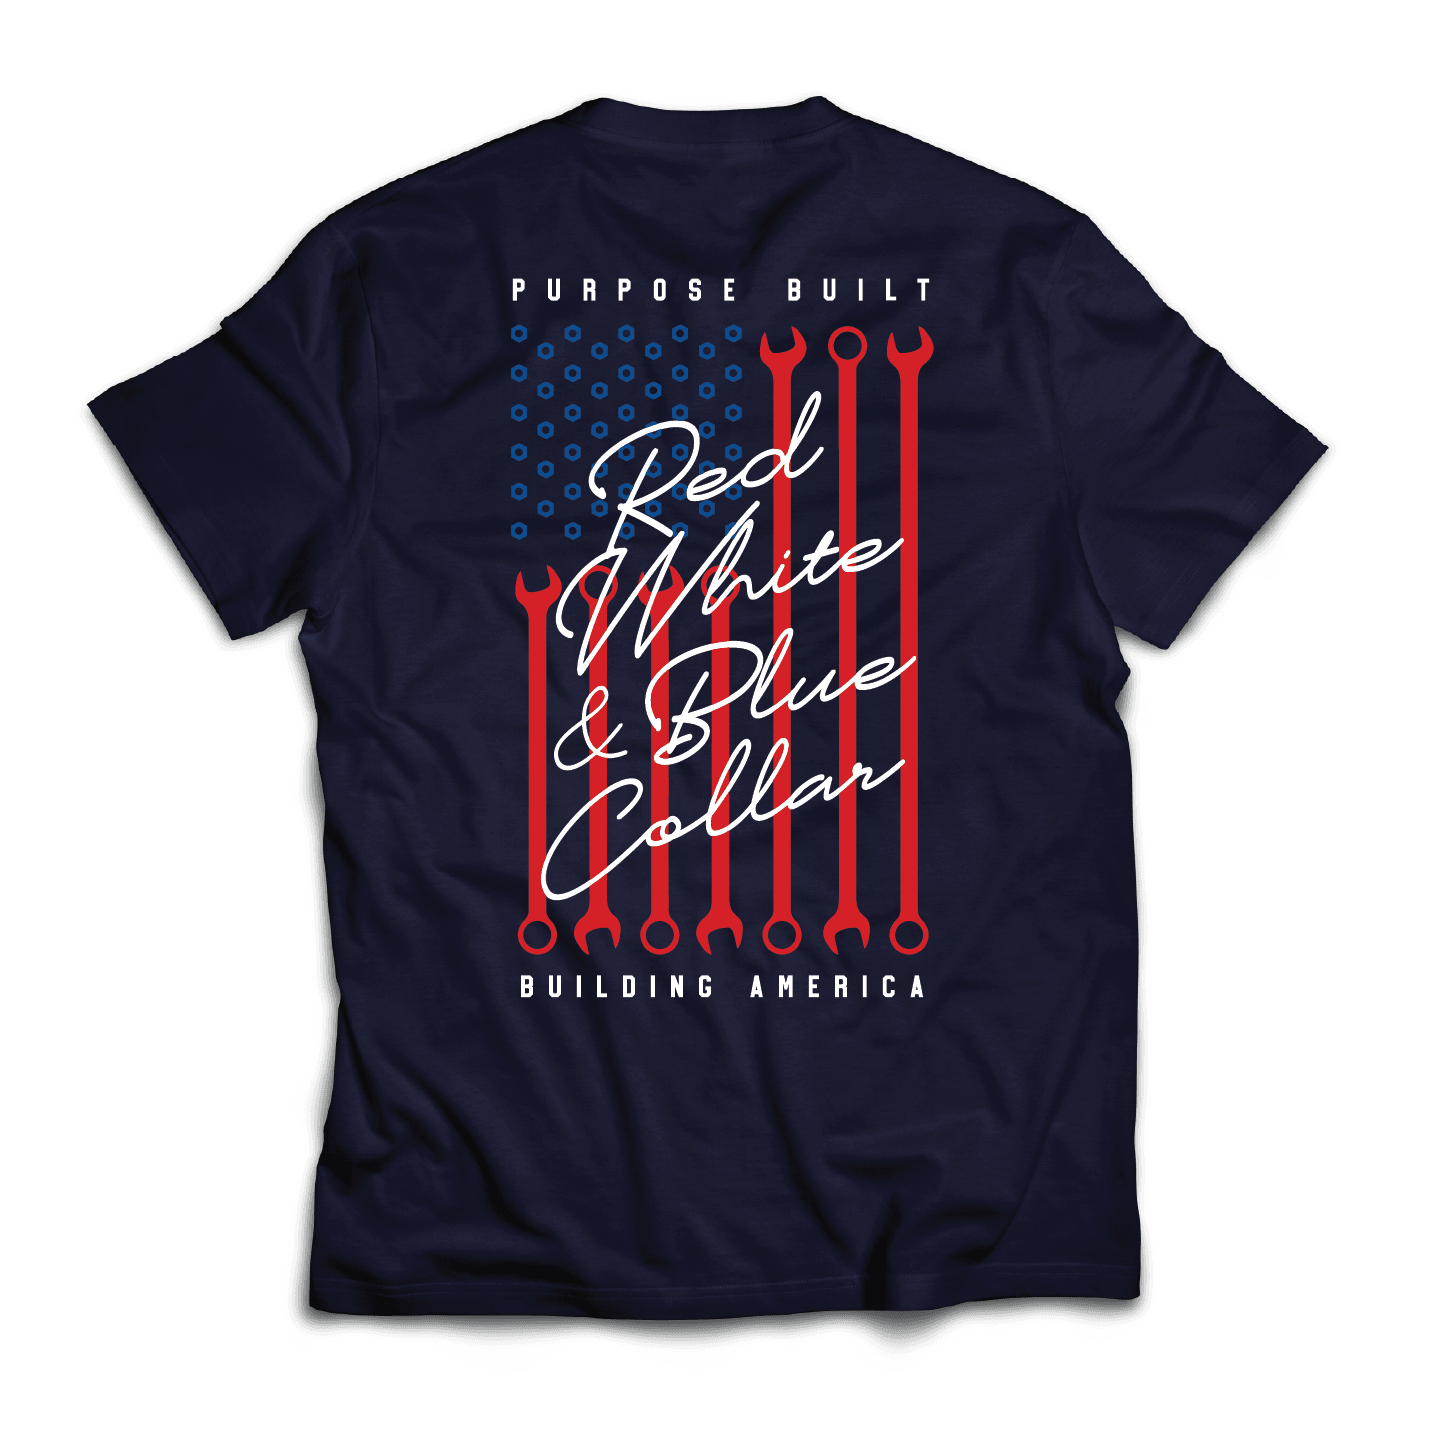 Hang em' High Tee, Navy - Purpose-Built / Home of the Trades